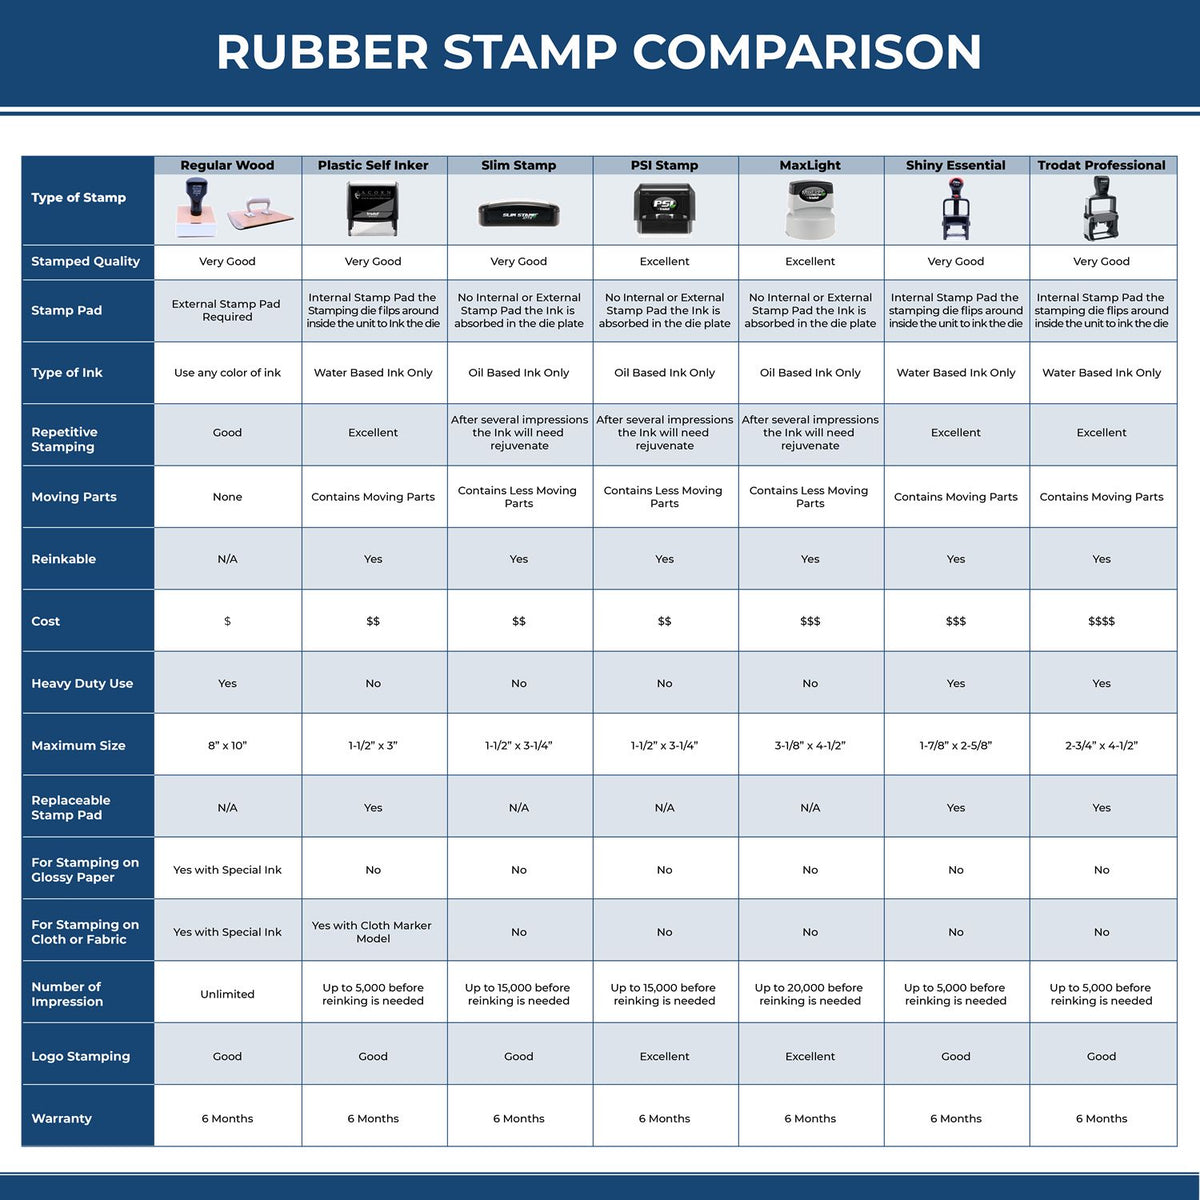 A comparison chart for the different types of mount models available for the MaxLight Premium Pre-Inked Utah State Seal Notarial Stamp.